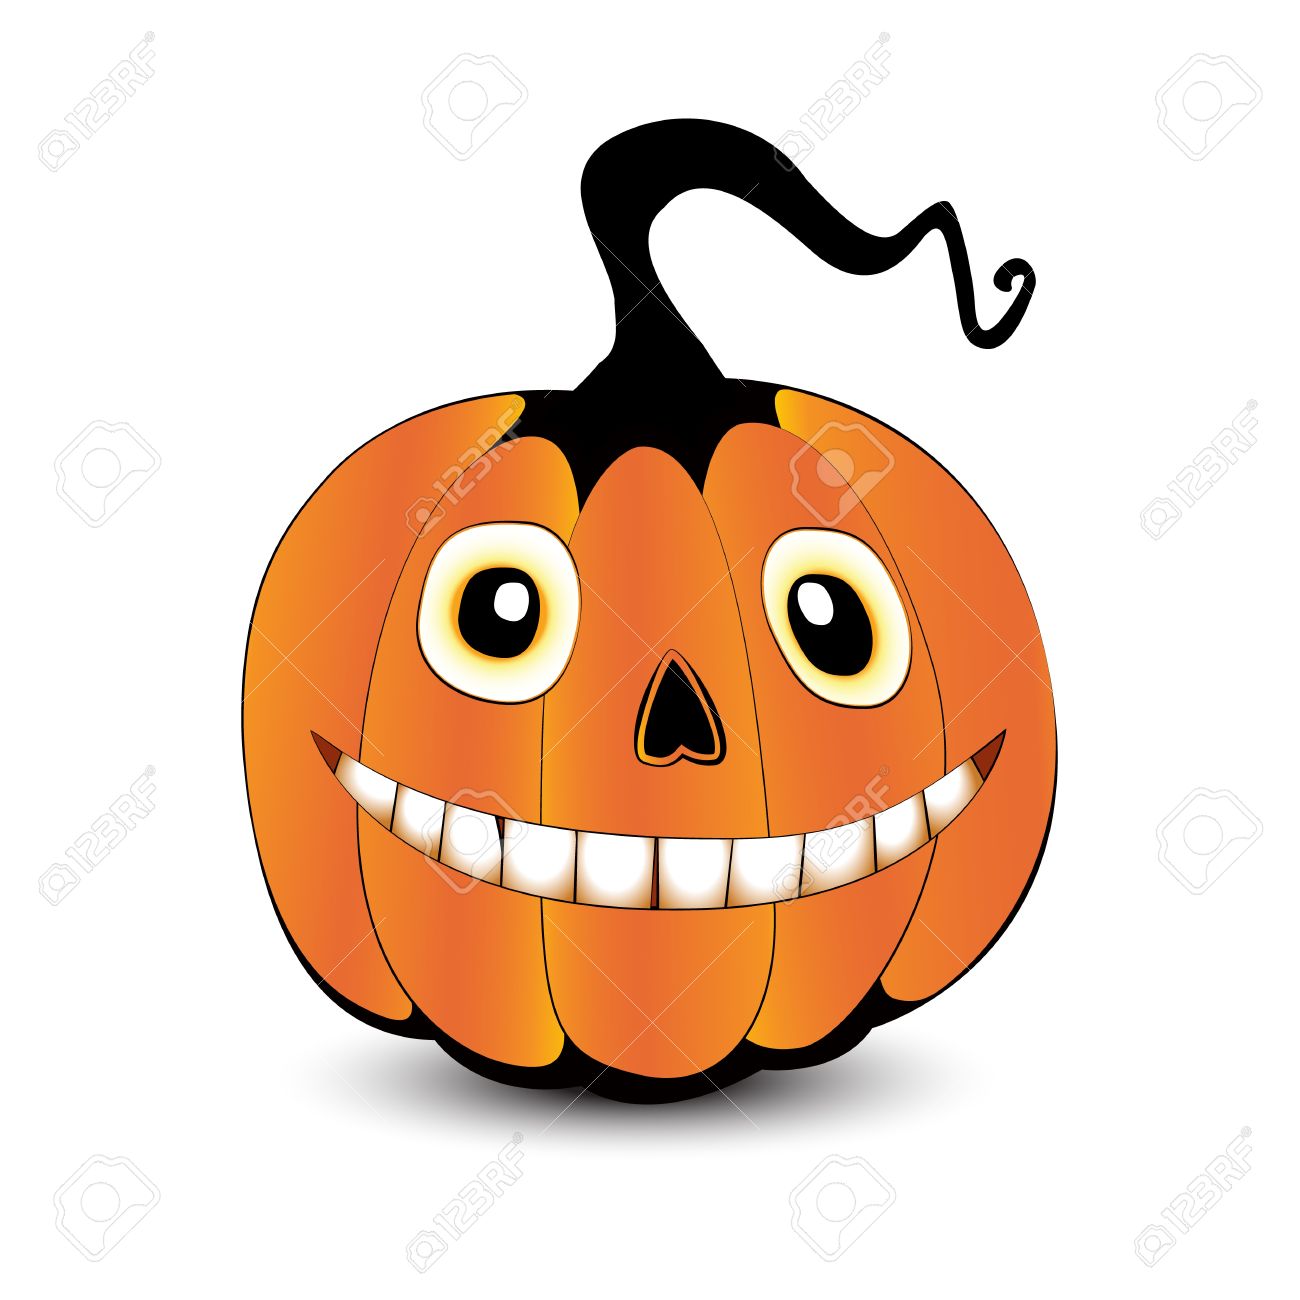 14,322 Pumpkin Face Stock Vector Illustration And Royalty Free.